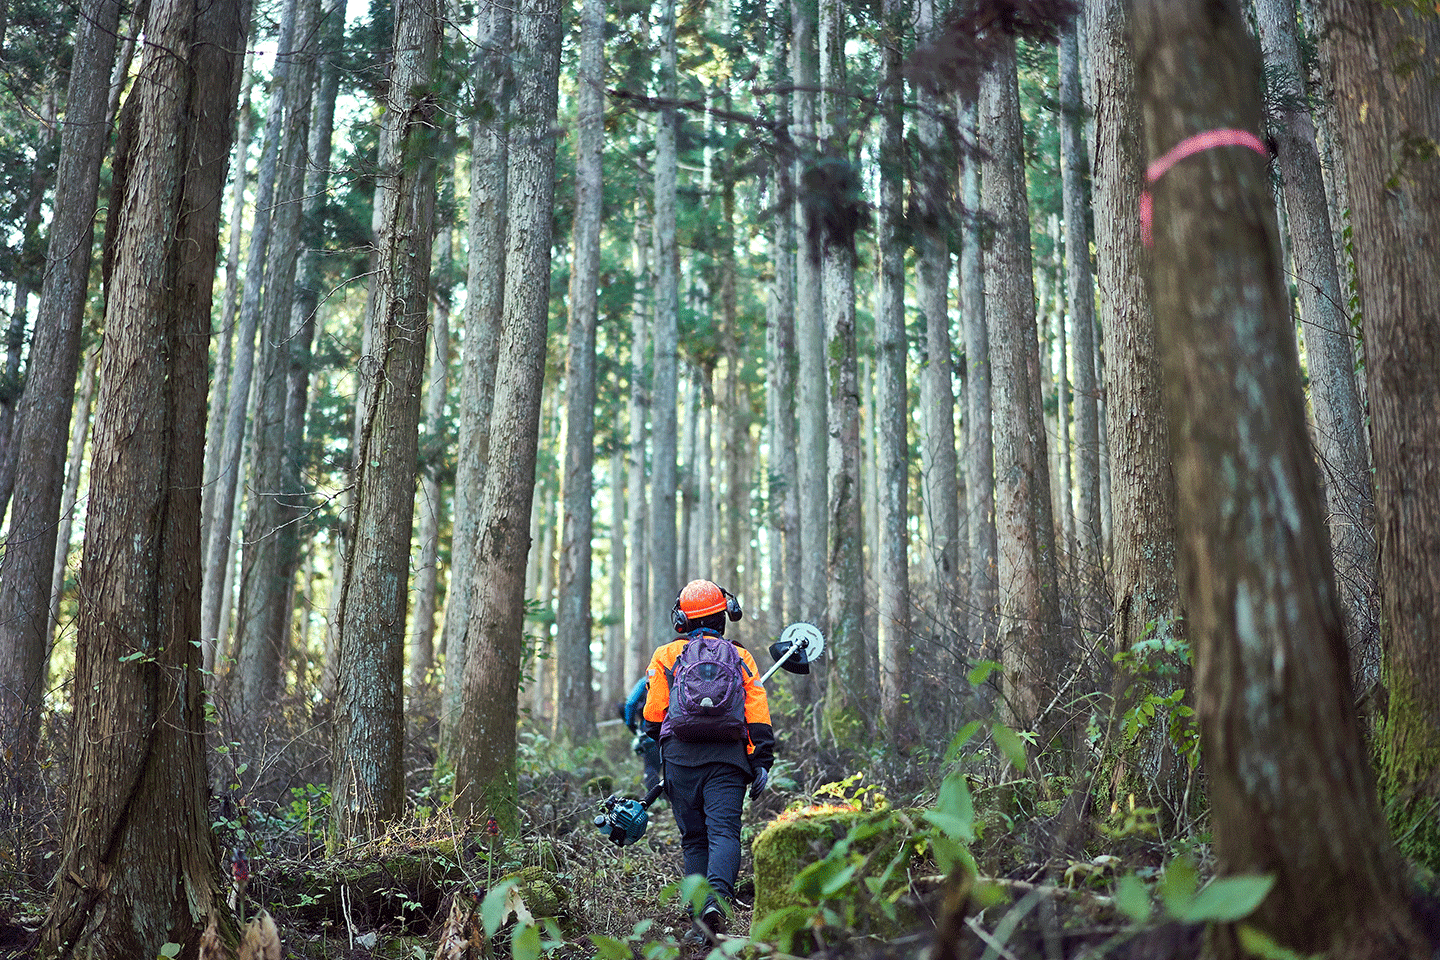 Person with orange jacket and helmet walks through tall trees with trimming saw